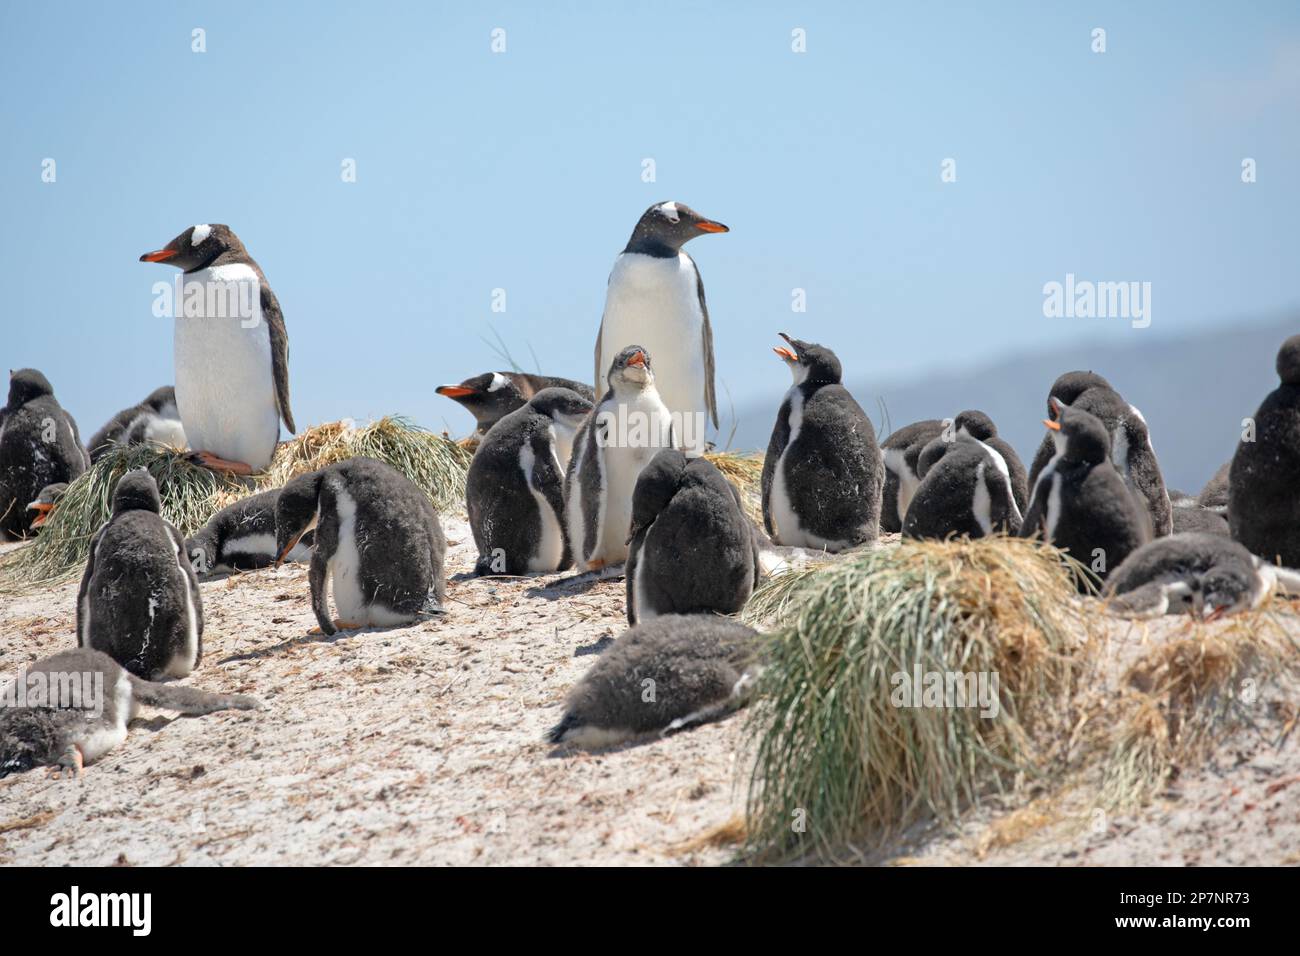 Gentoo Penguins, Pygoscelis Papua,in a colony at Yorke Bay on The Falkland Islands. Stock Photo